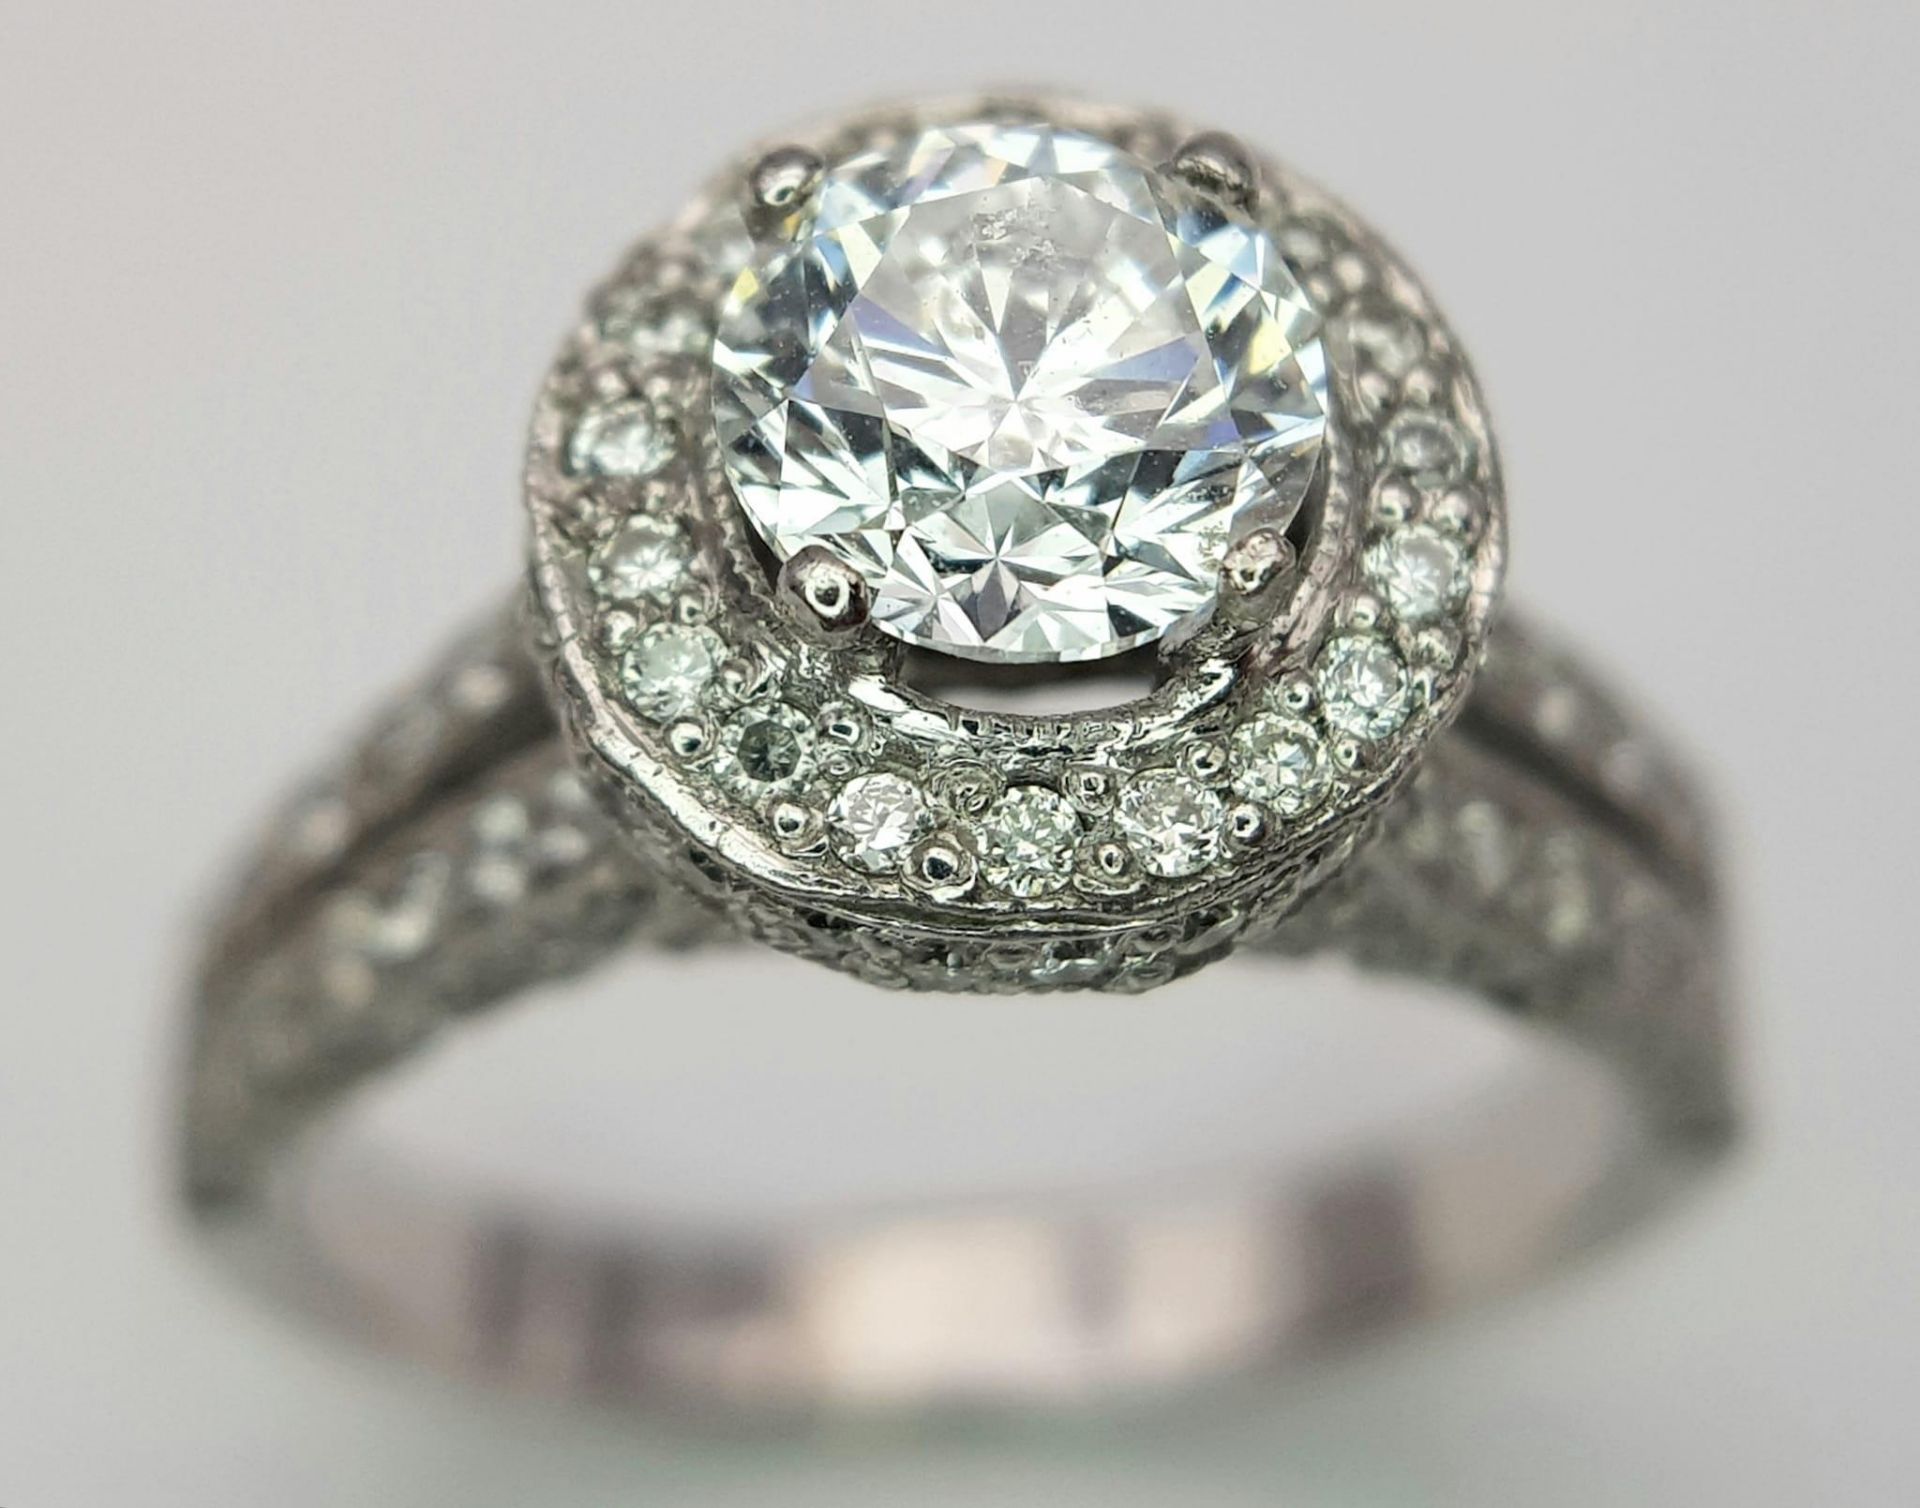 An 18 K white gold ring with a brilliant cut diamond (1.01 carats) surrounded by diamonds on the top - Bild 16 aus 22